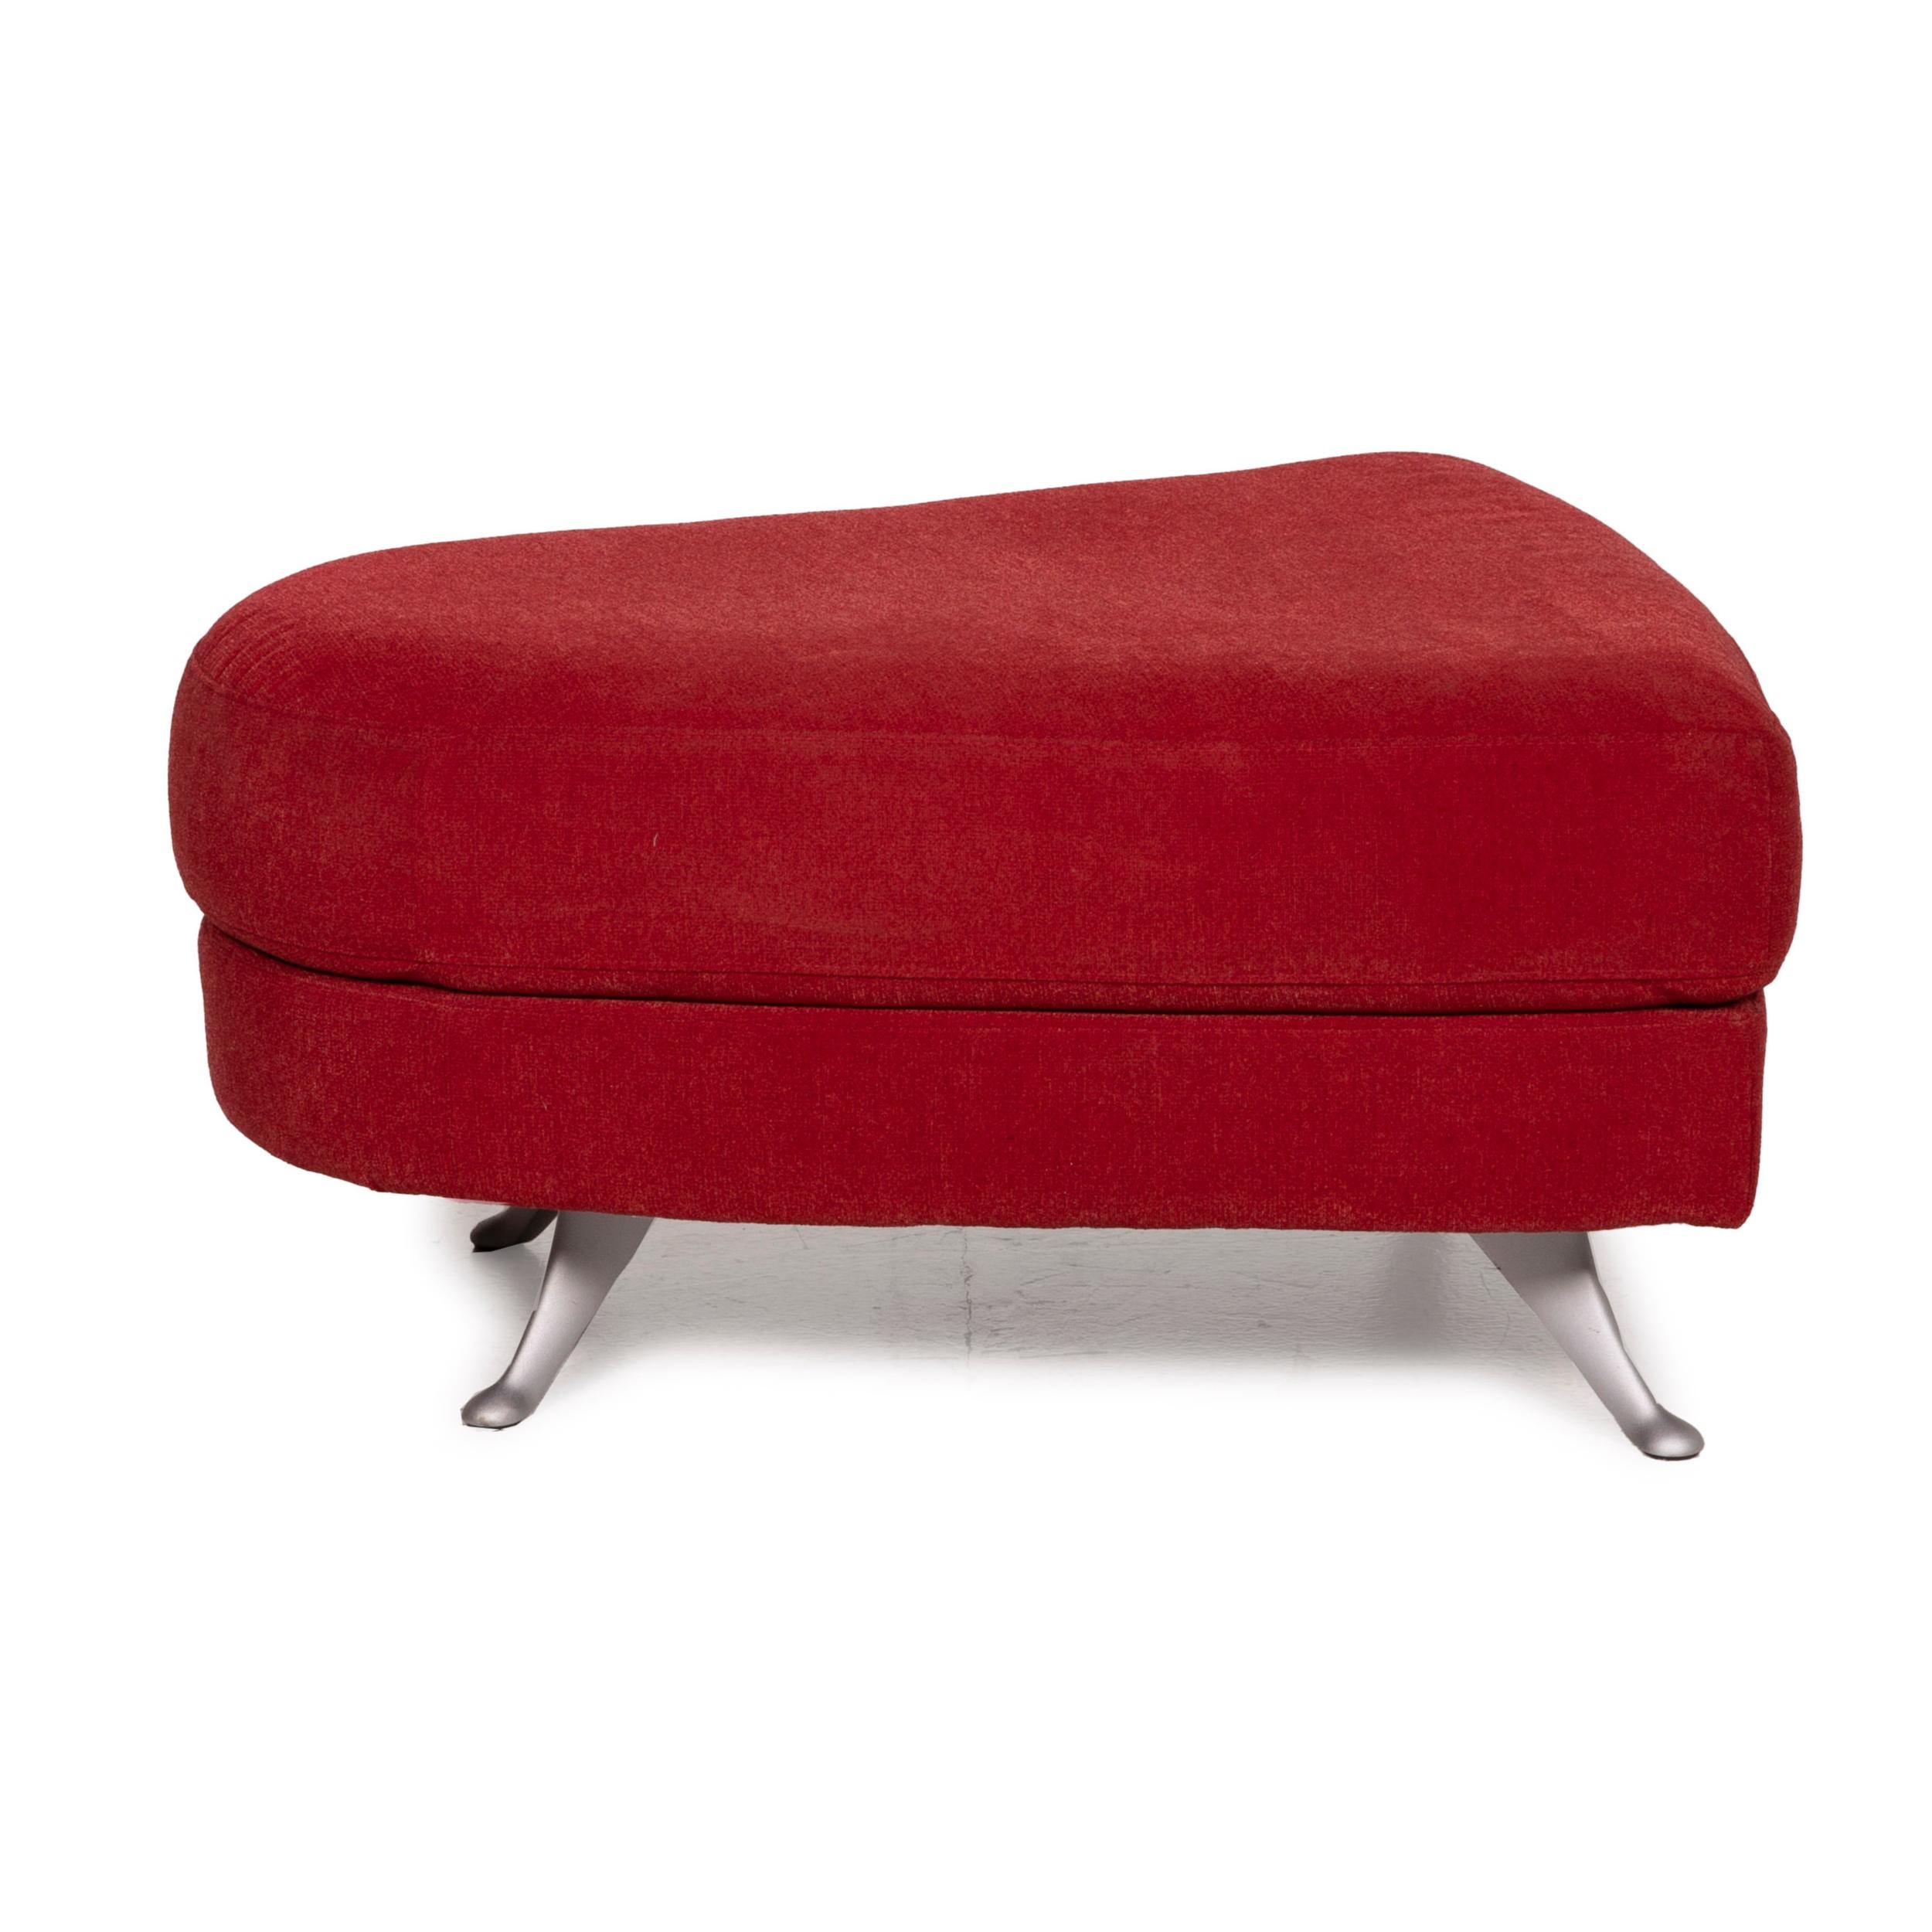 Rolf Benz 2500 Red Three-Seater Fabric Sofa Incl. Ottoman Set 5